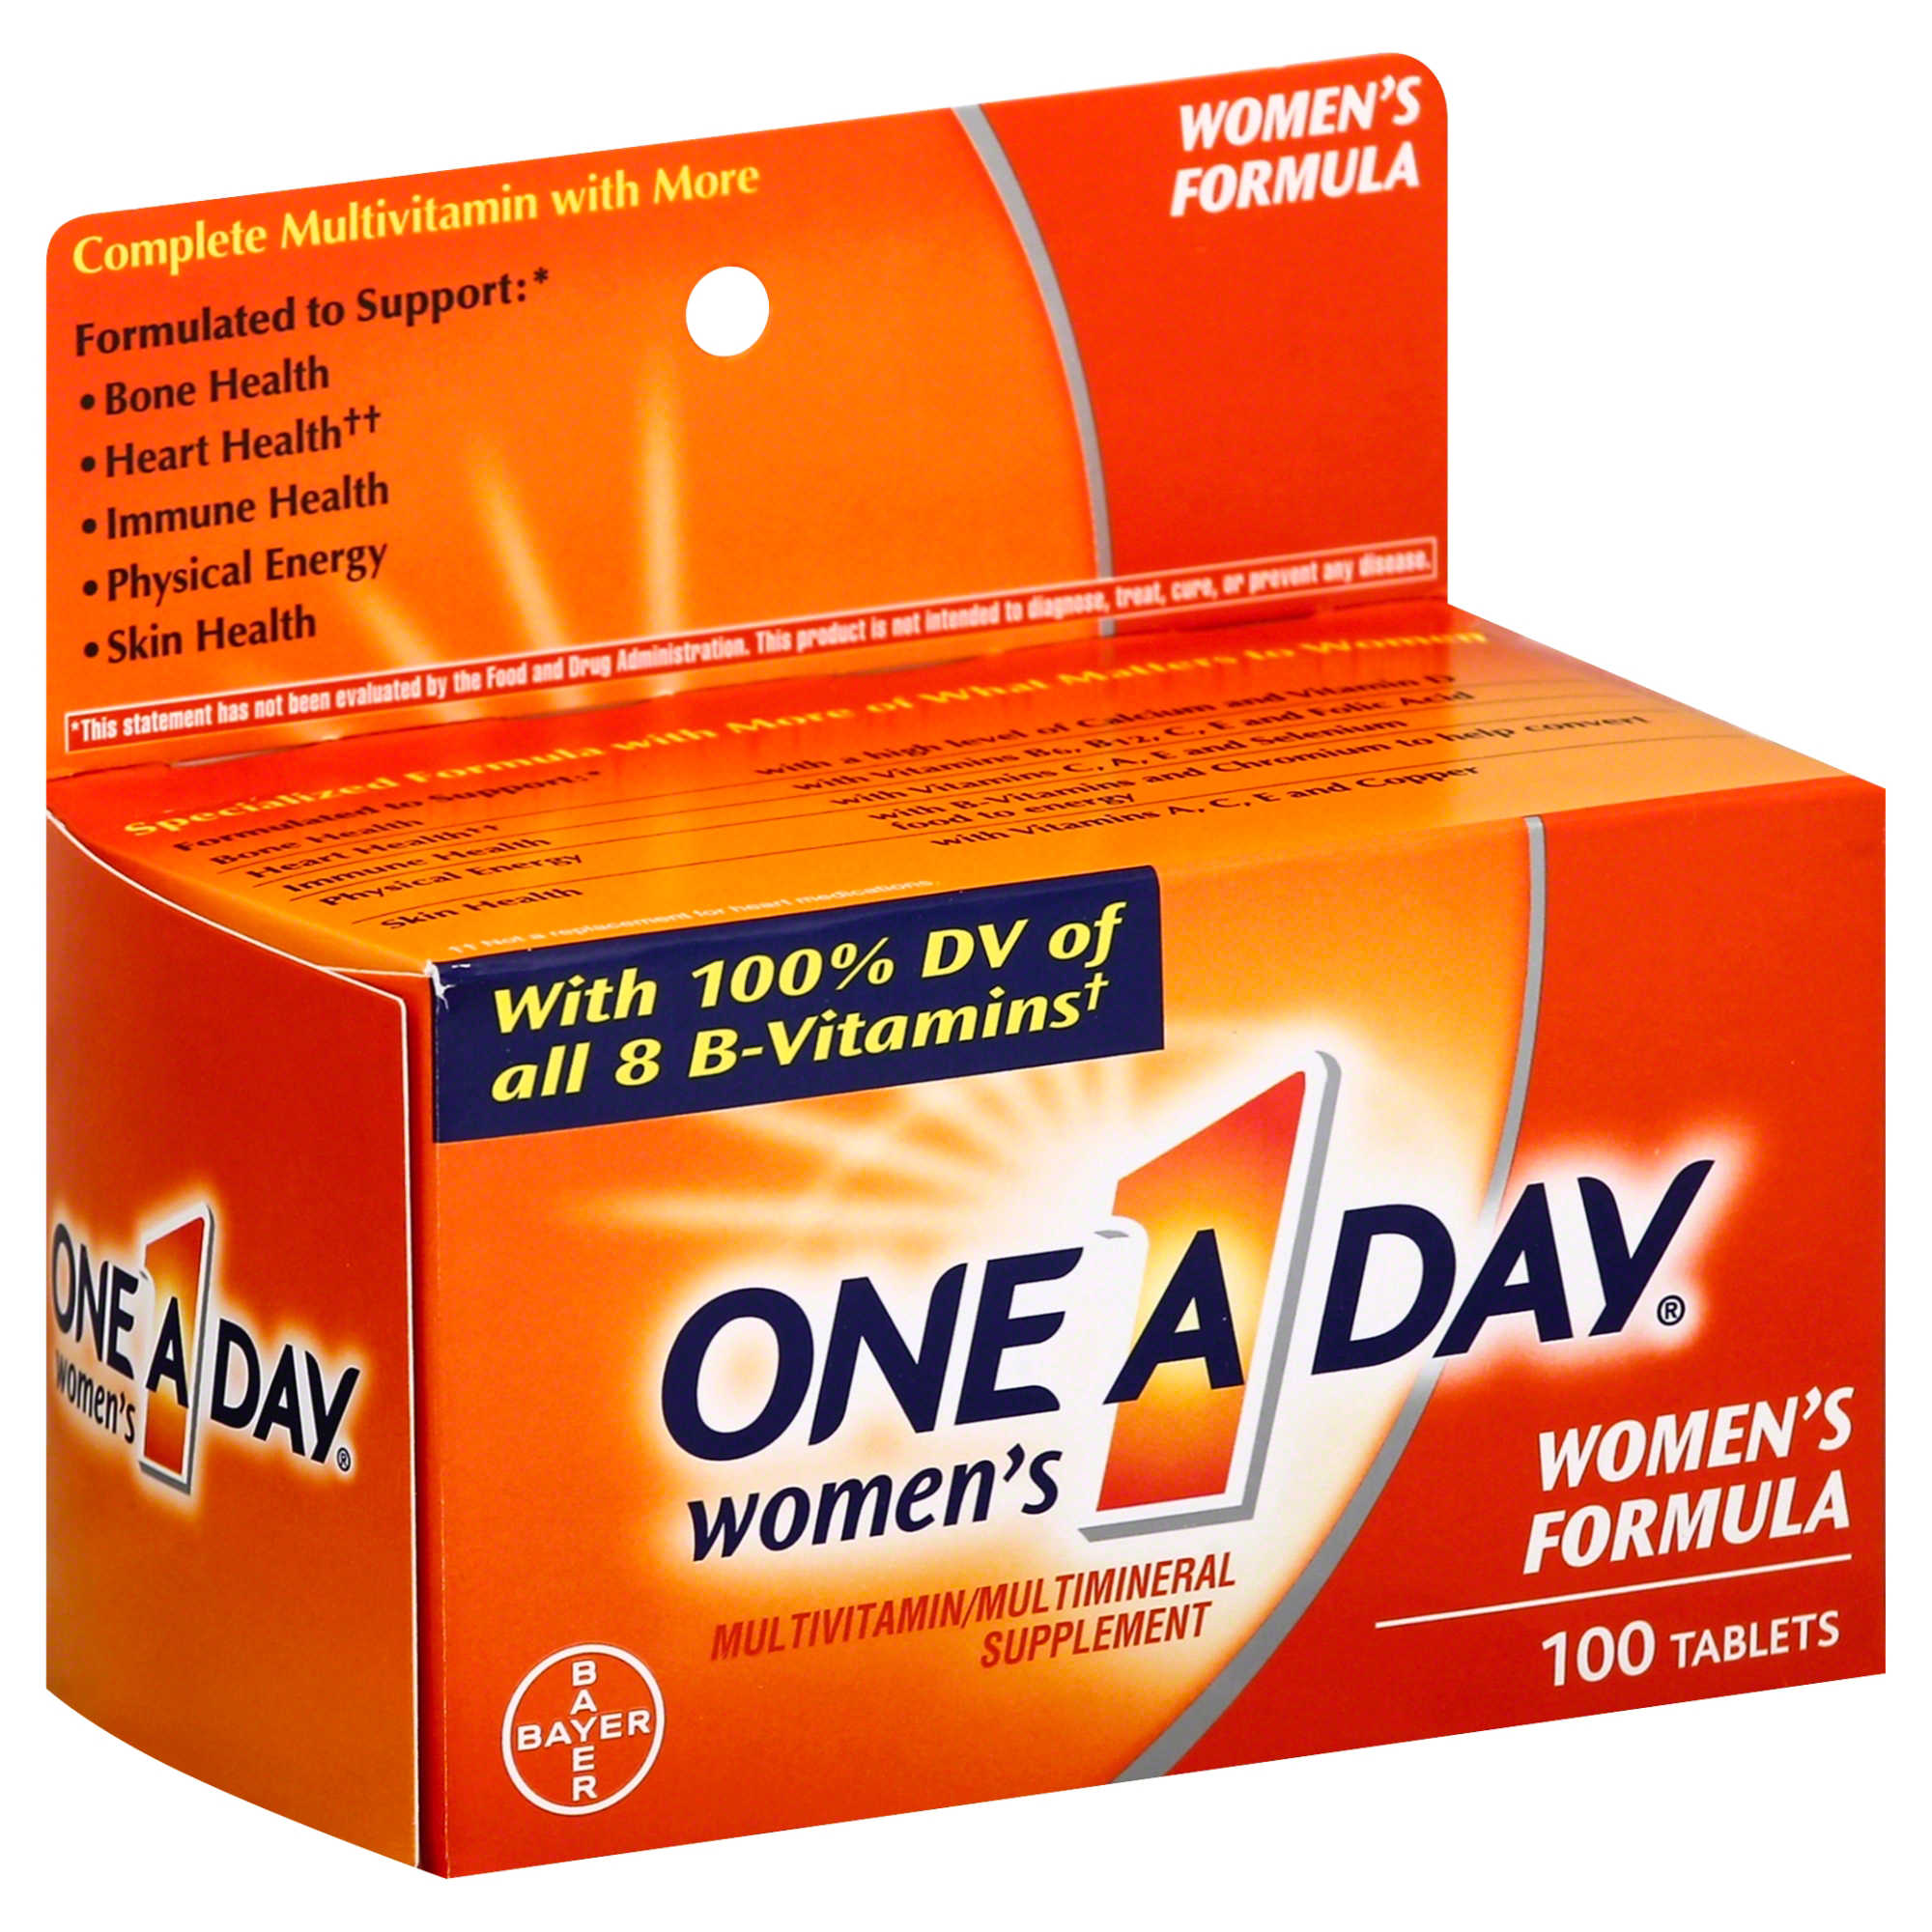 One A Day Women's 100-Count Multivitamin & Multimineral Supplement Tablets